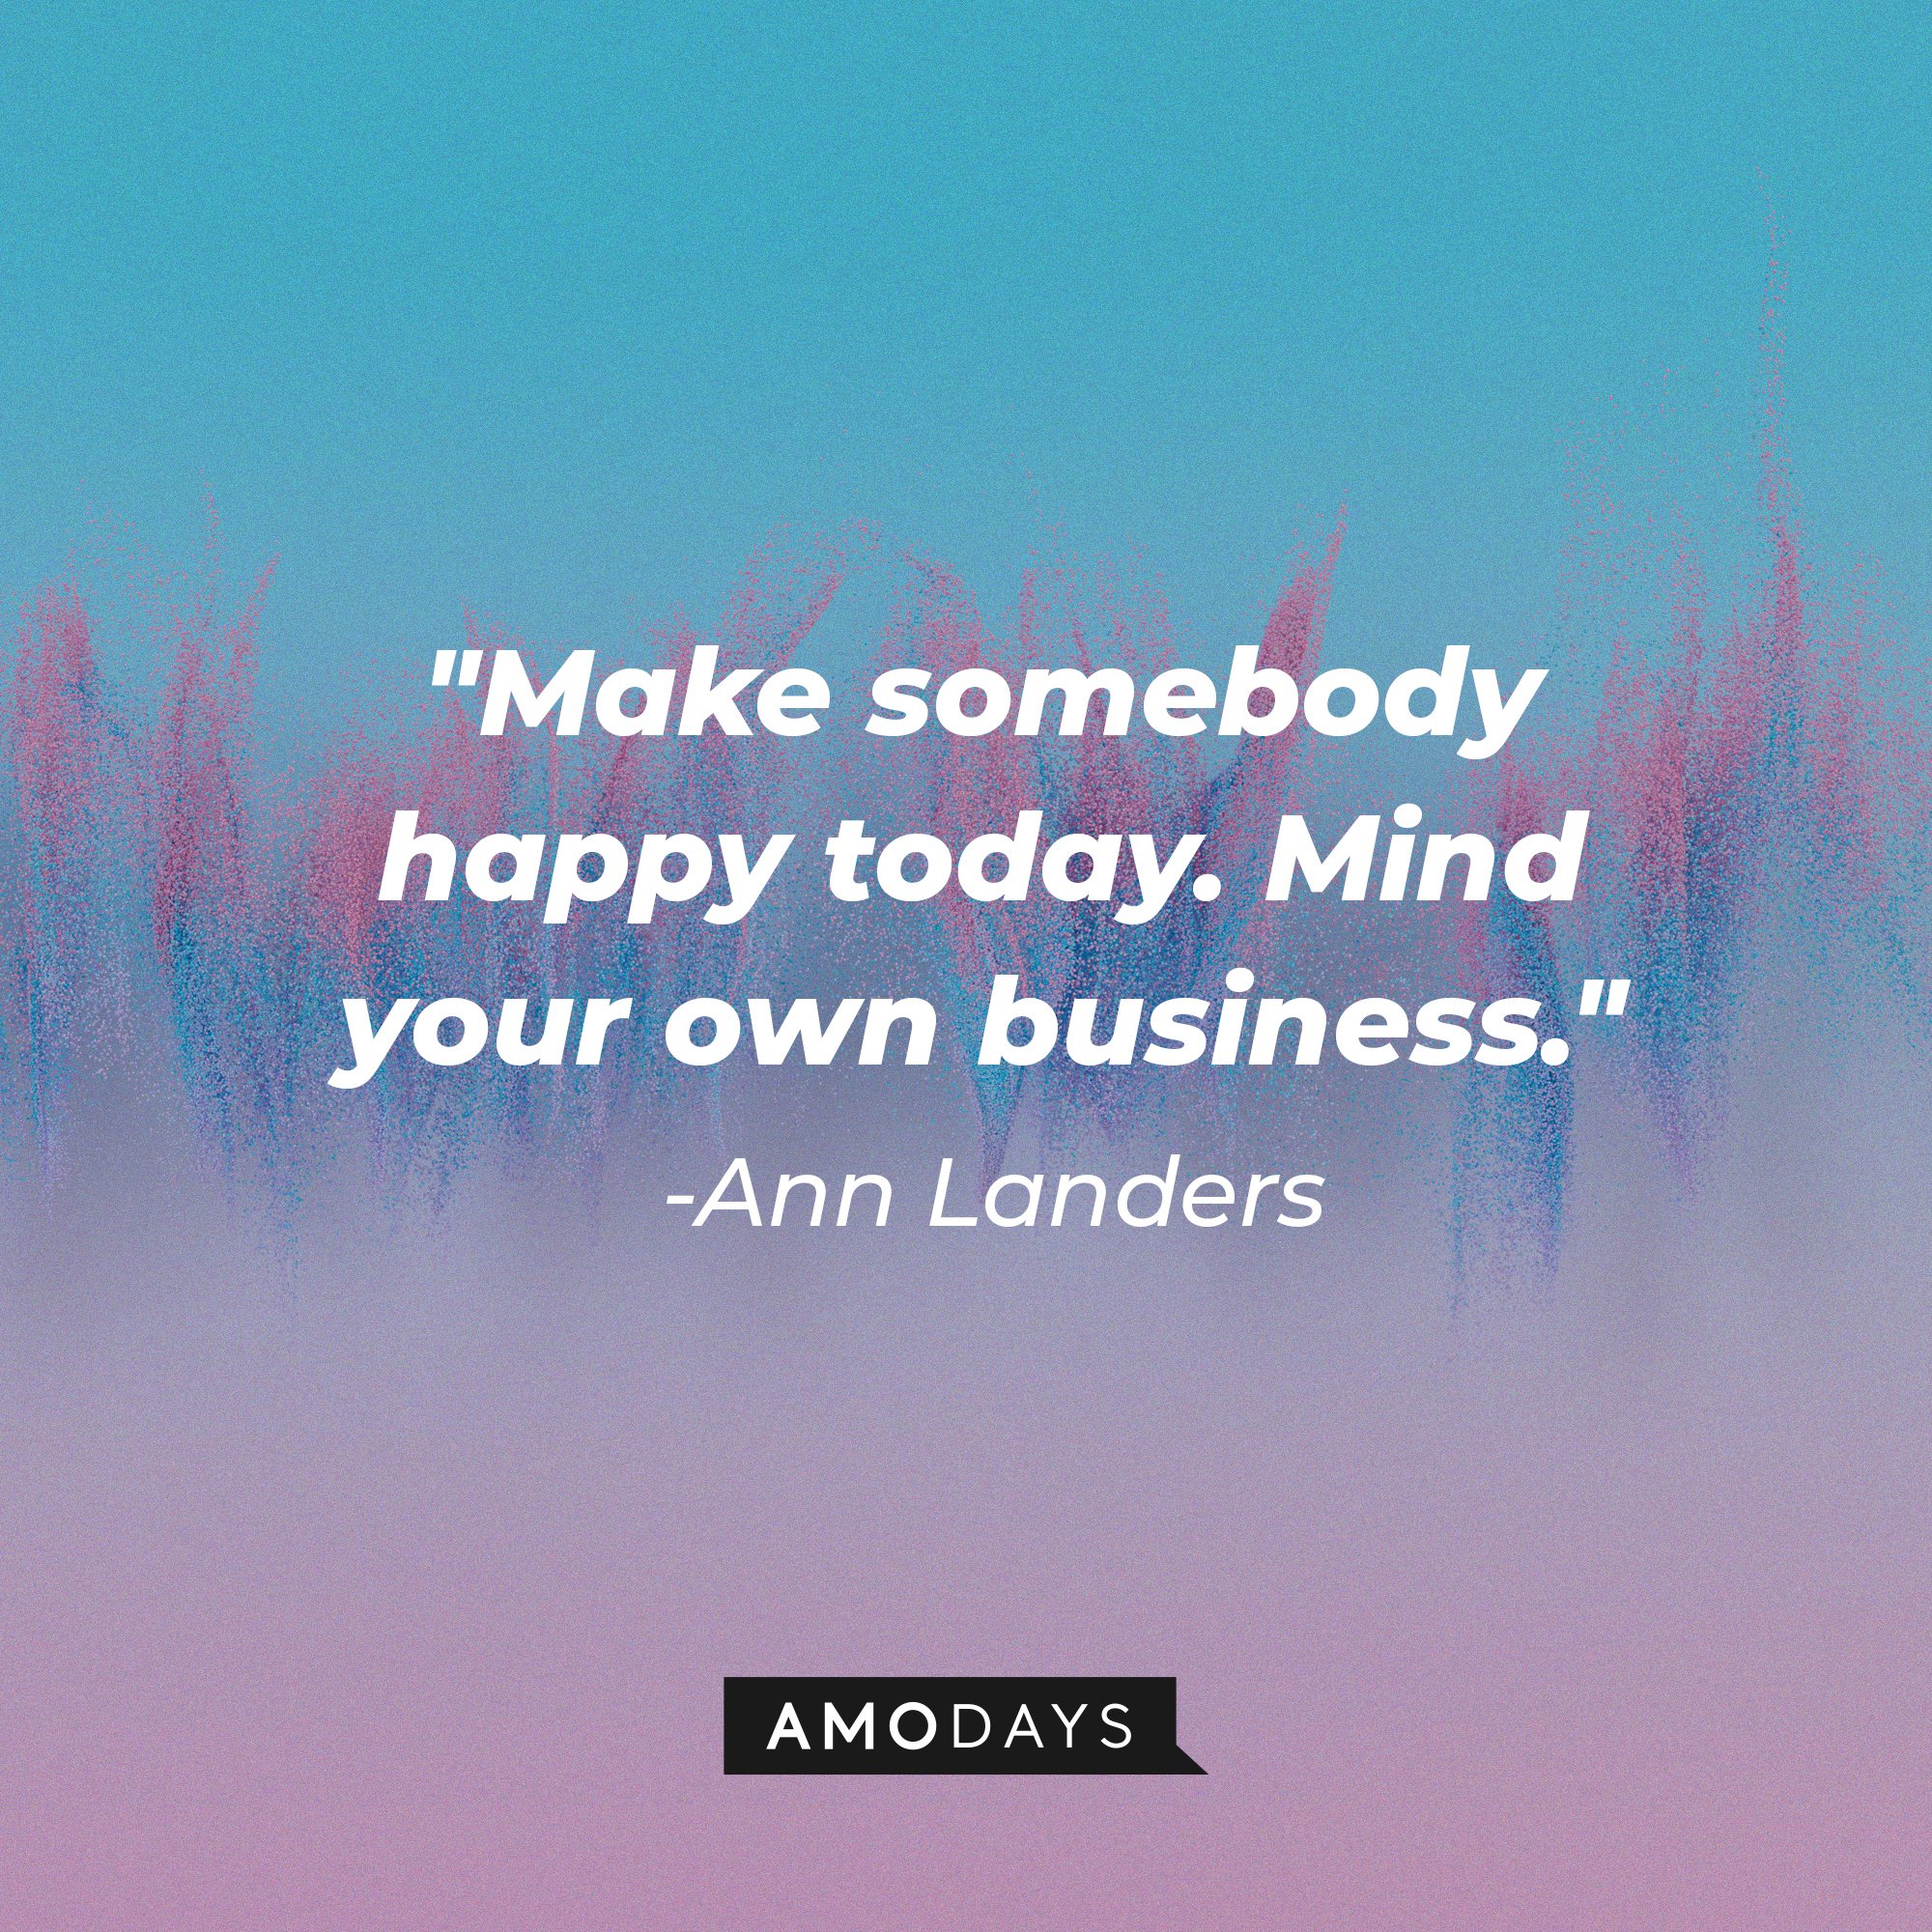 Ann Landers’ quote: "Make somebody happy today. Mind your own business." | Image: AmoDays